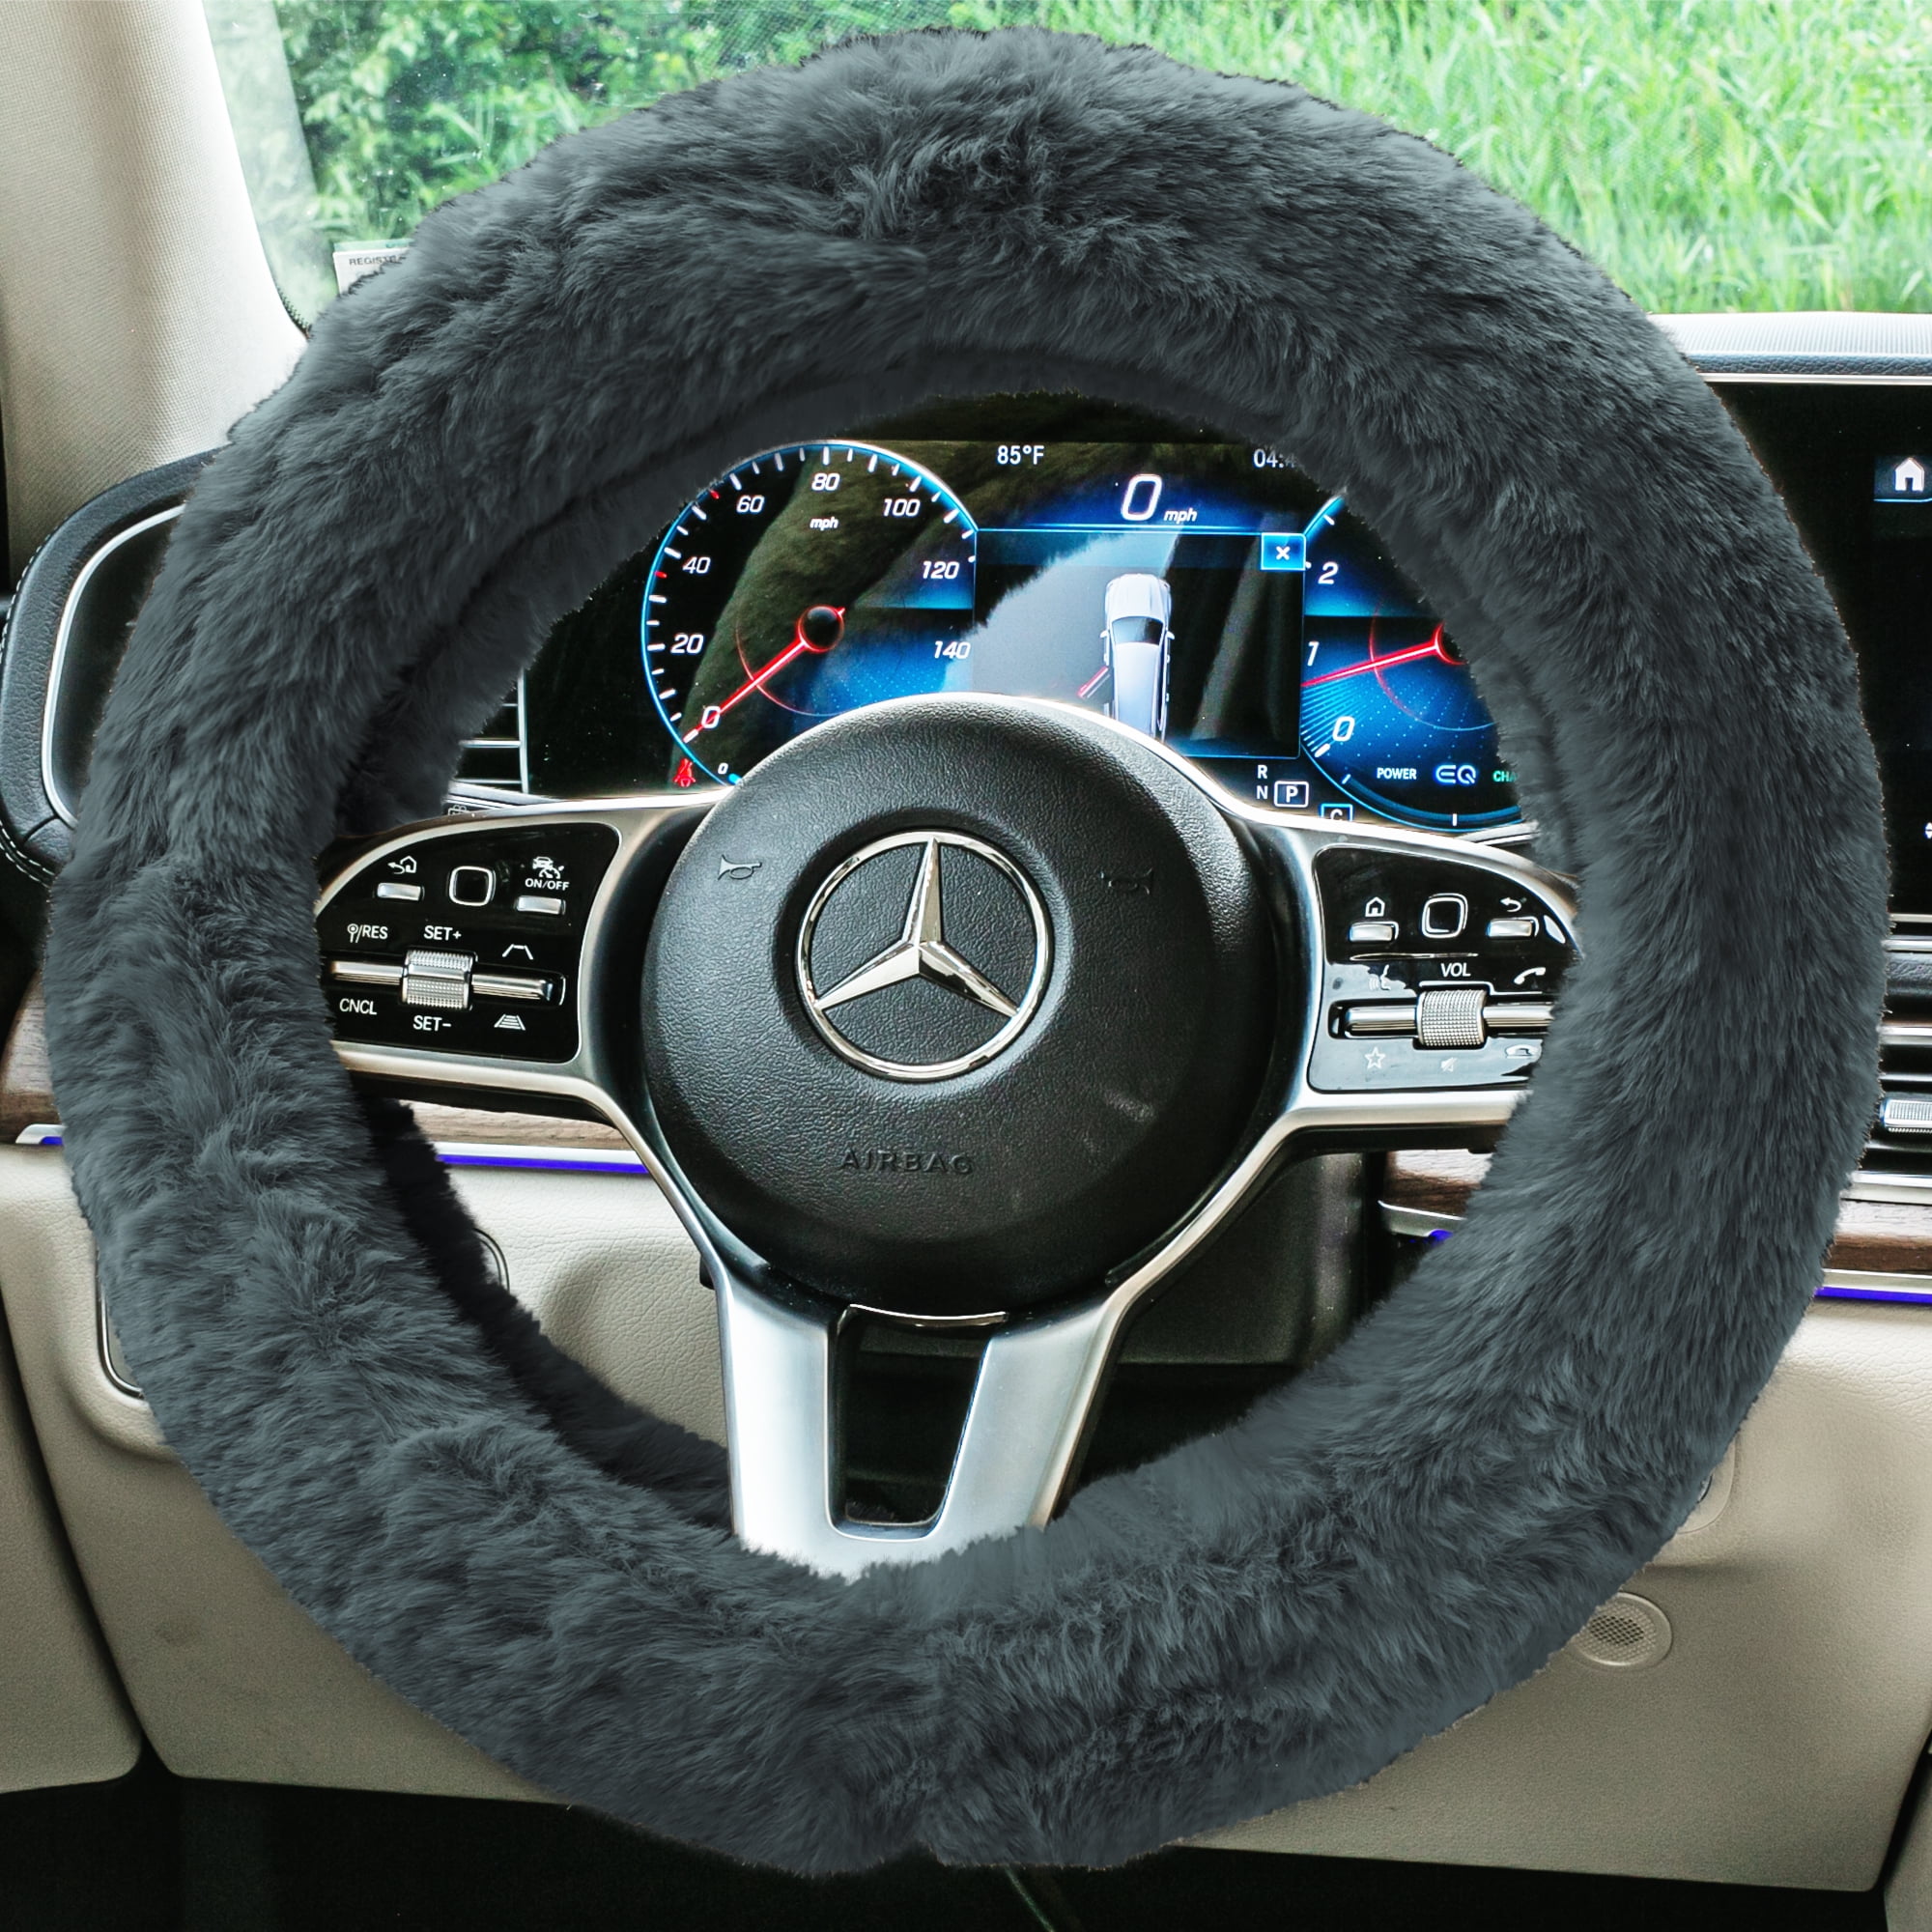 Plush Protective Animal Print Soft Steering Wheel Cover for Car Truck SUV